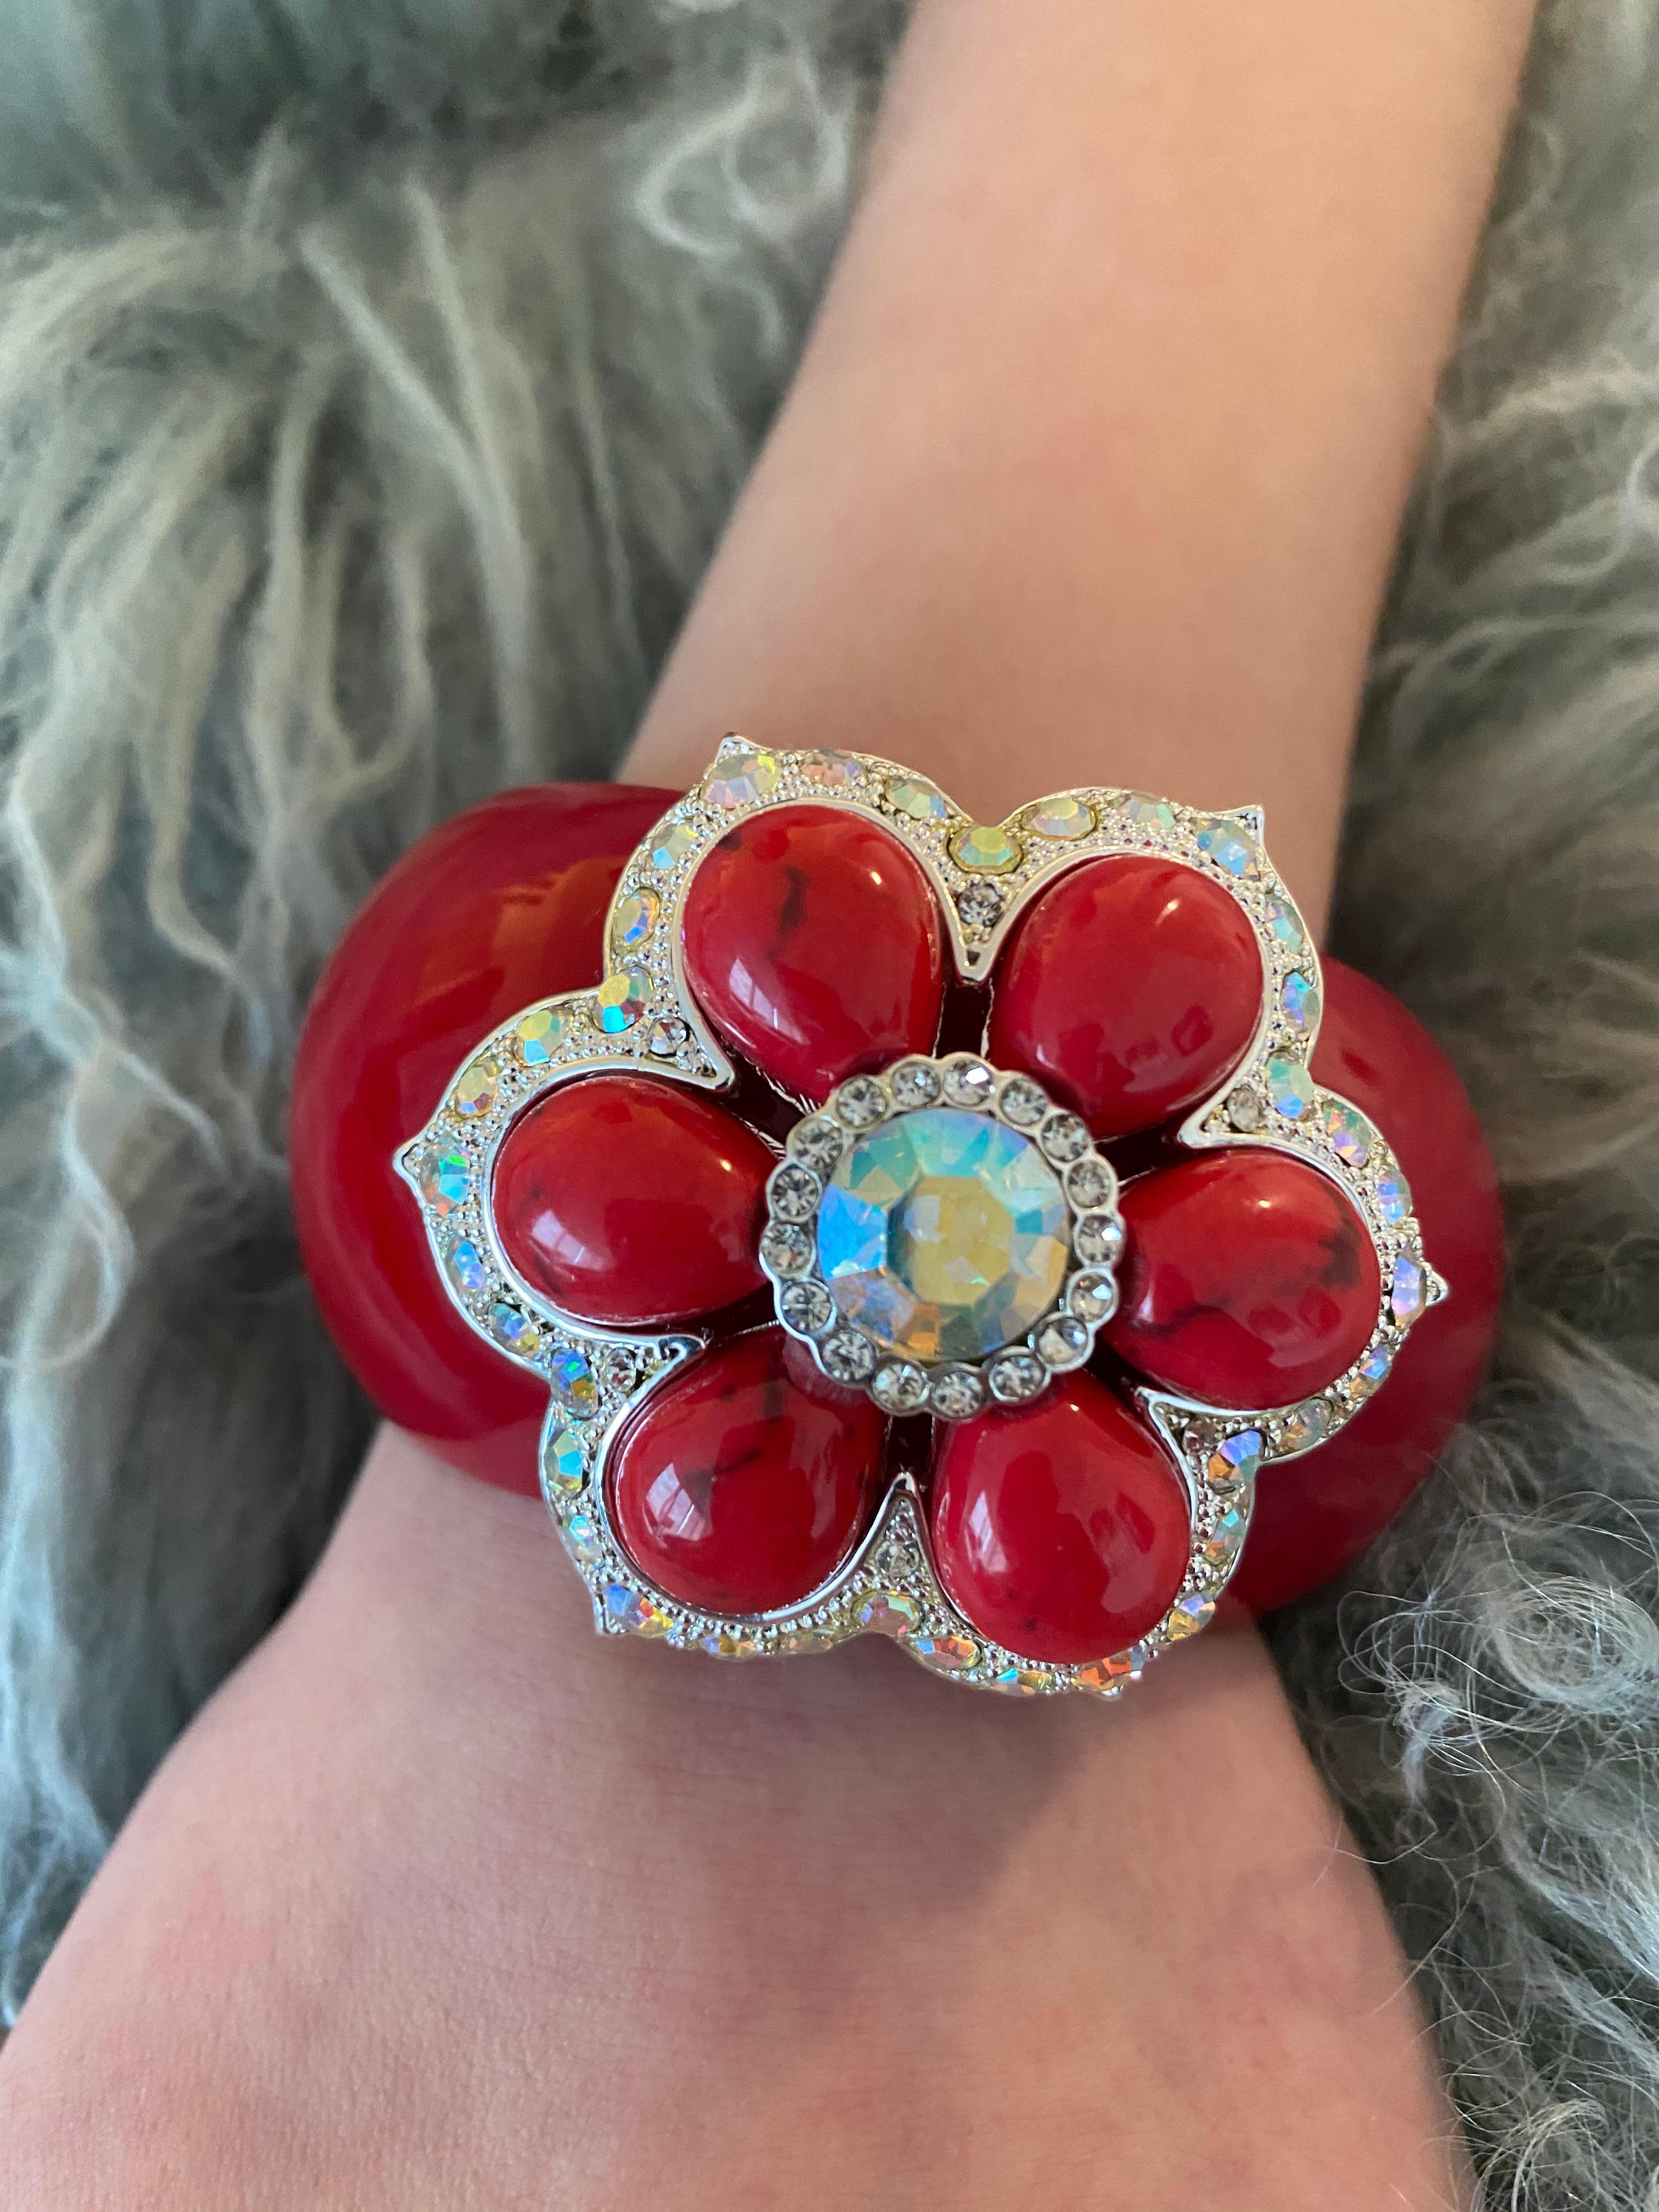 “Volver” Bochic red carpet bijoux jewlery, from the “IKON” private collection. 
 An homage to Pedro Almadovar color motifs. The cuff features a parker rose flower. 
The dangerous red Rasin cuff is set with SWAROVSKI crystals, white plated with an